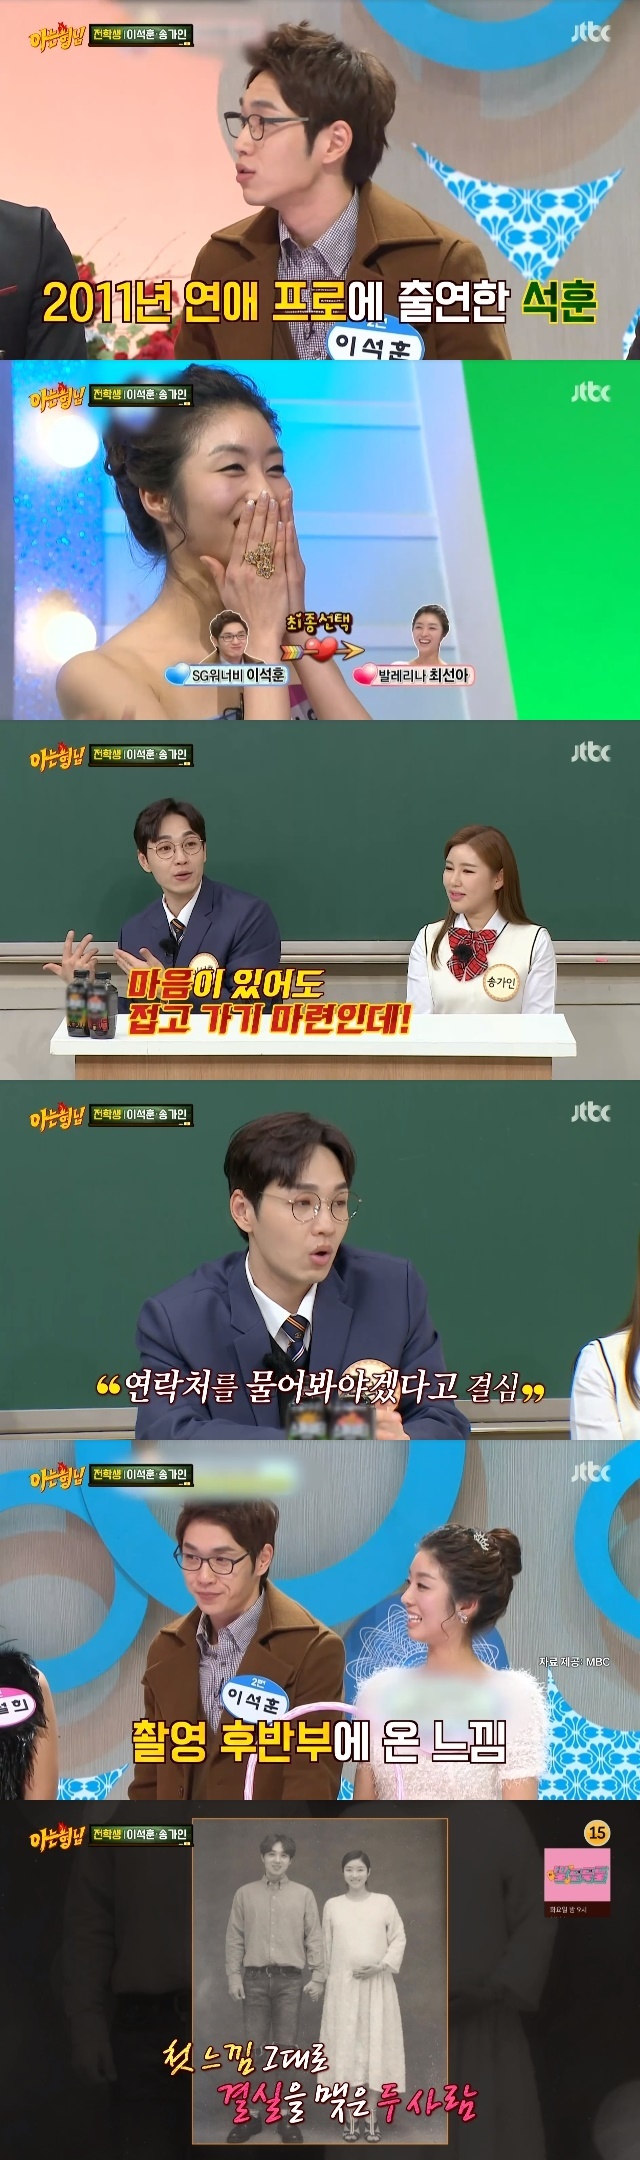 Lee Seok Hoon reveals affection for ballerina wifeIn the 328th JTBC entertainment Knowing Bros (hereinafter referred to as Knowing Bros), which was broadcast on April 16, singer Song Gain and Lee Seok Hoon, who are in charge of legends of each genre, transferred to their brothers school.Lee Seok Hoon wrote on his property holdings that he was a loving wife and wife and showed his love.For me, my son and my beloved wife are the driving force, he explained.Kang Ho-dong instead told Lee Seok Hoon that he met his wife in a love program.Lee Seok Hoon said, I was going to do this when I was in the middle of a lot of love programs. I went and there was a prominent woman.I approach it as work after the broadcast, so I have to fold it even if I have a heart, but then I wanted to ask (number), he explained why the relationship between the couple on the broadcast could have developed into marriage.My brothers asked if the real relationship was true, saying, The first Feelings are different. Lee Seok Hoon said, We filmed for two days, rather than when we first met.Feelings came in on the last shoot. People asked, Did you get married at a young age? Feelings said they were different.There came Feelings, Marriage is with him, she replied.